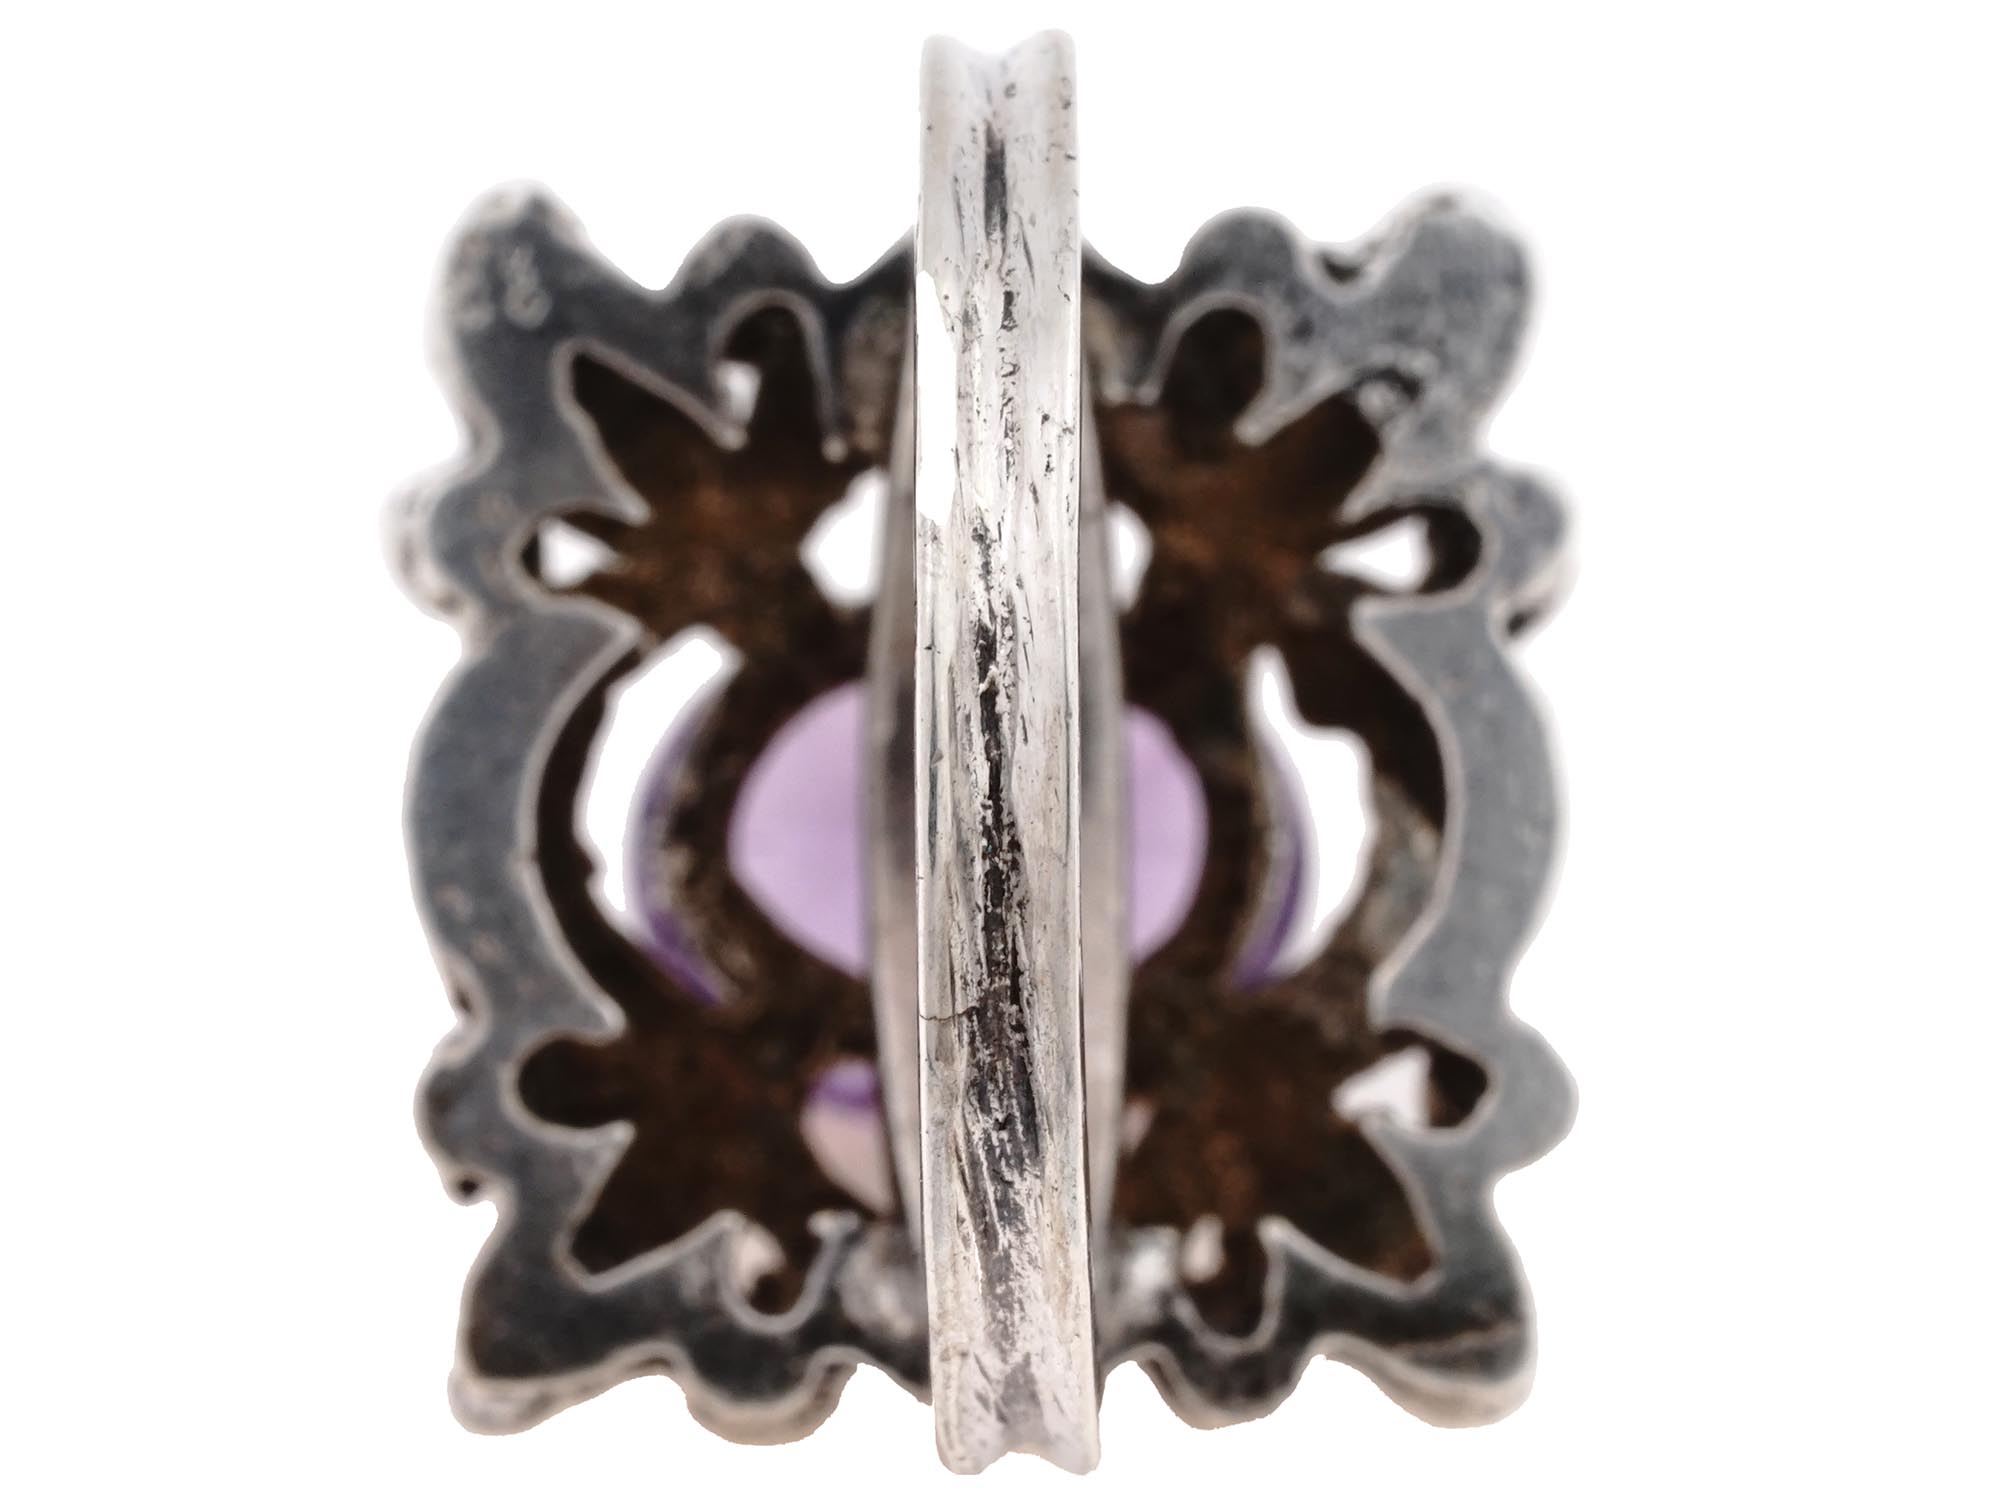 ART NOUVEAU 800 SILVER AMETHYST STONE JEWELRY RING PIC-6